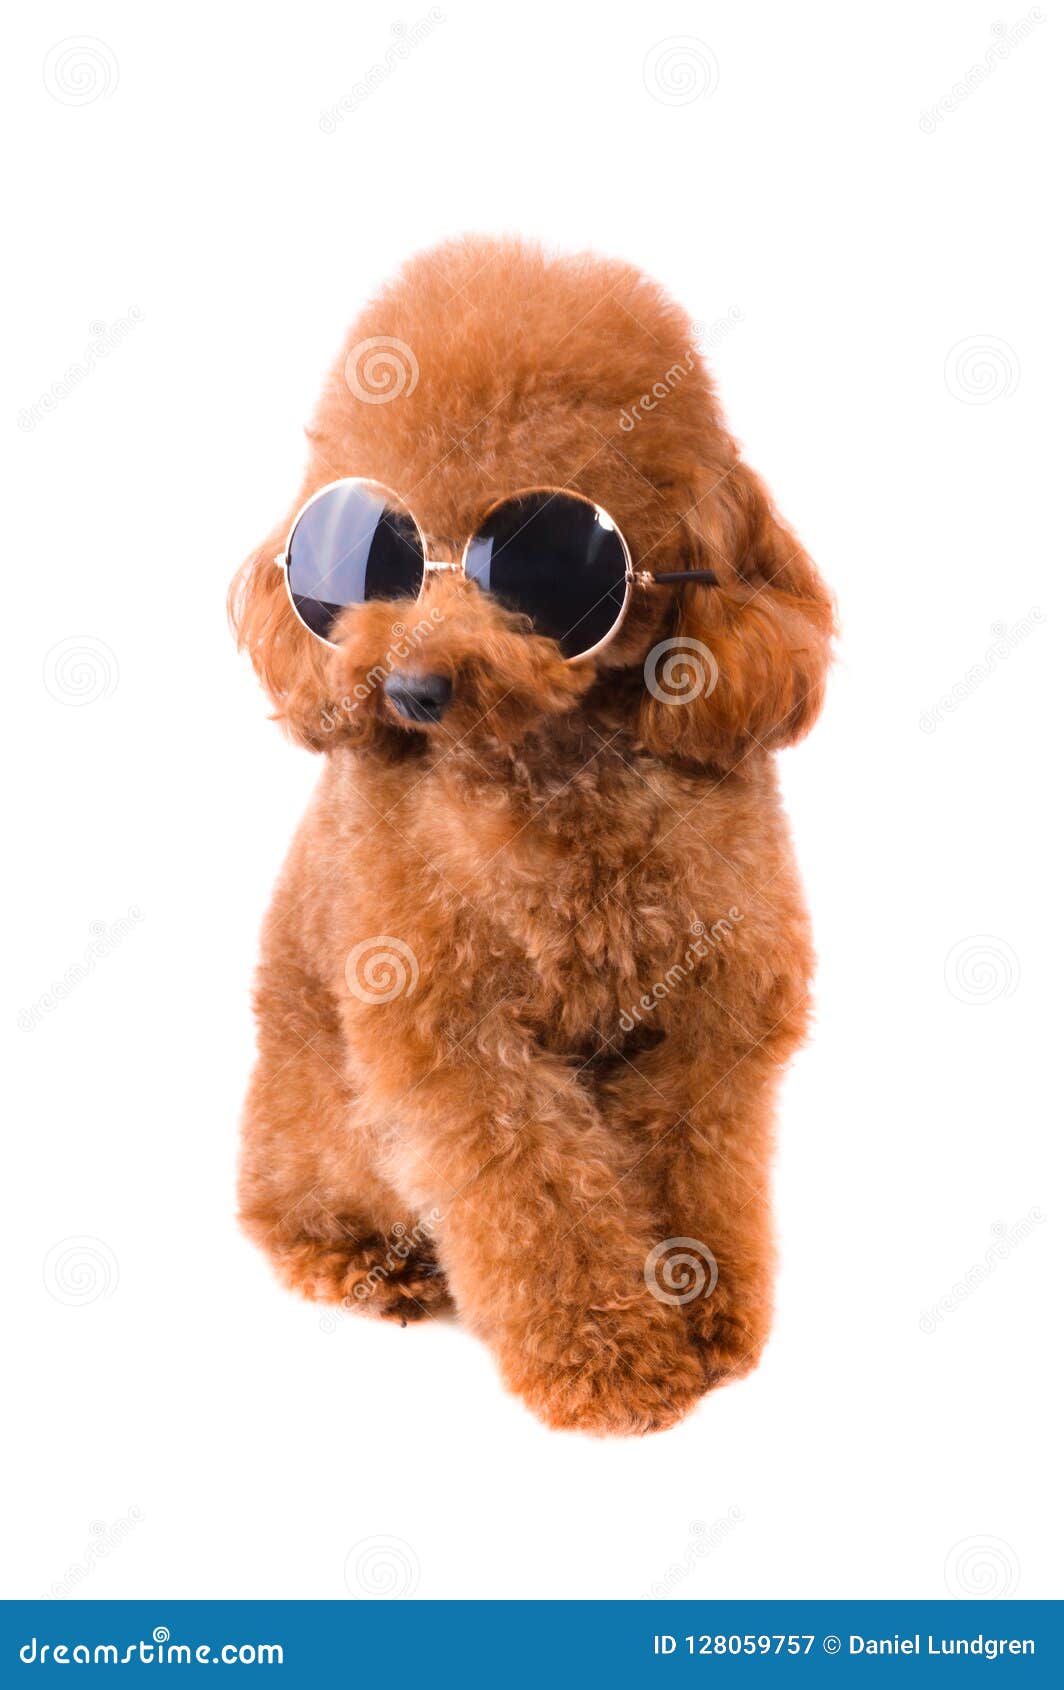 Mini Toy Poodle with Golden Brown Fur on a White Background Stock Photo -  Image of adorable, nose: 94222354